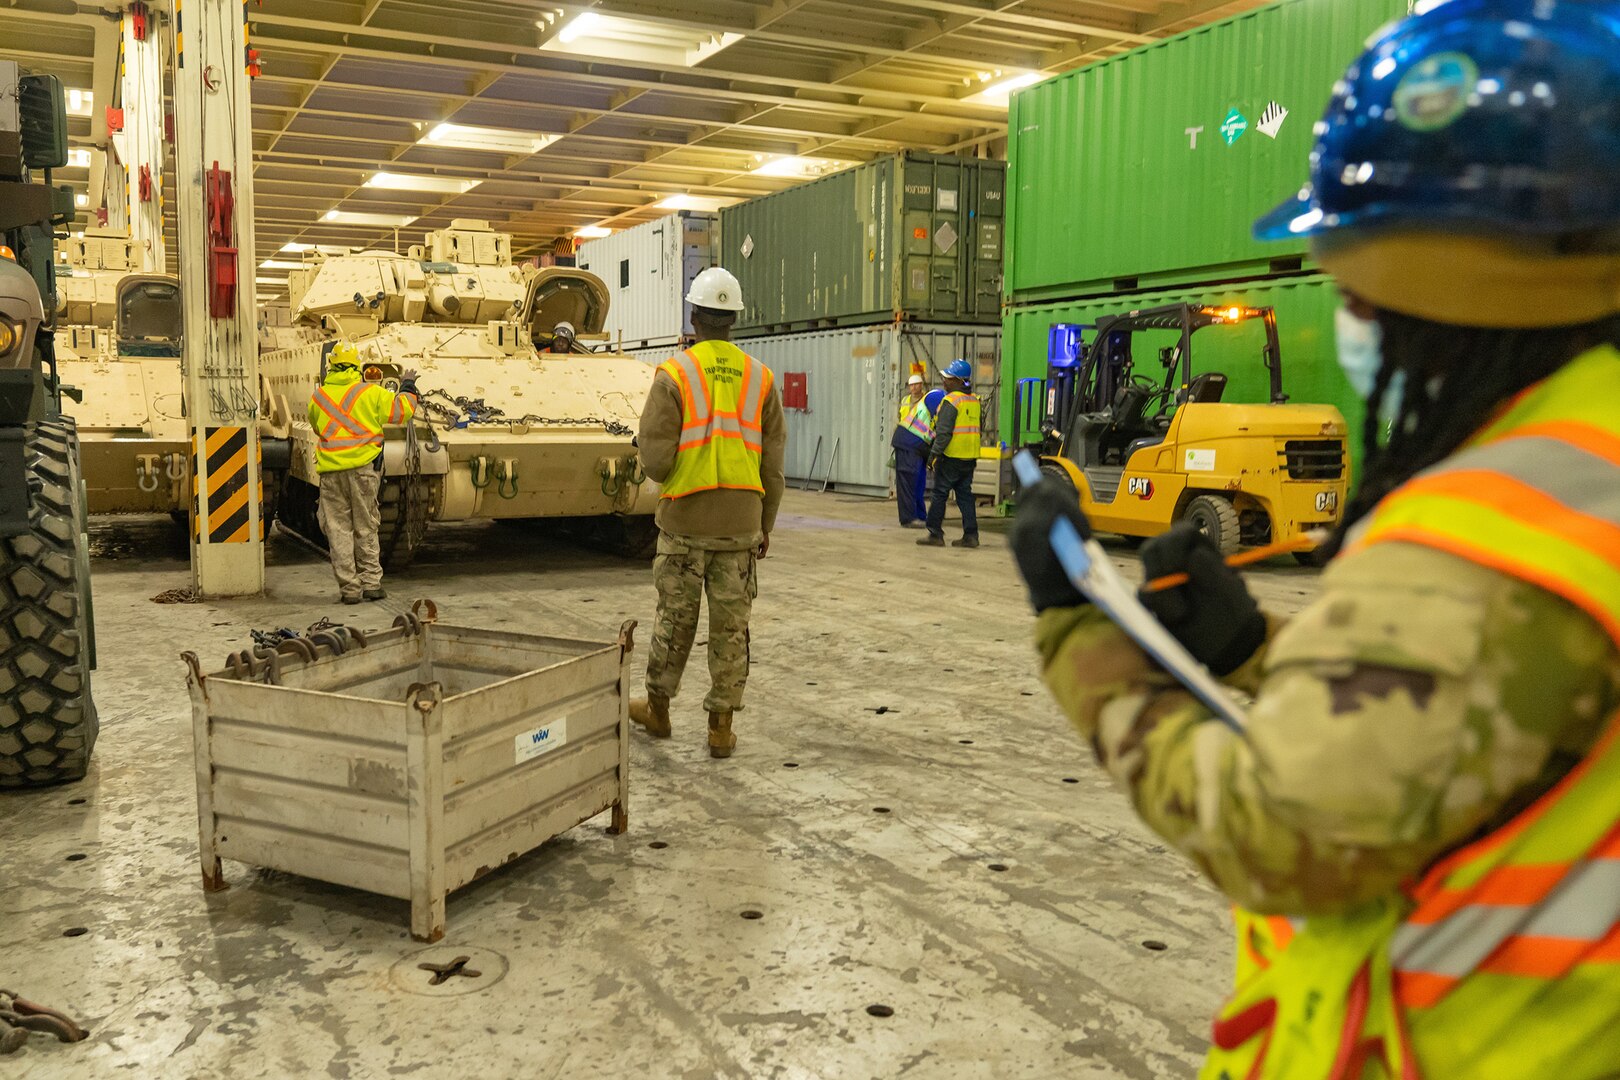 Soldiers work in a warehouse.